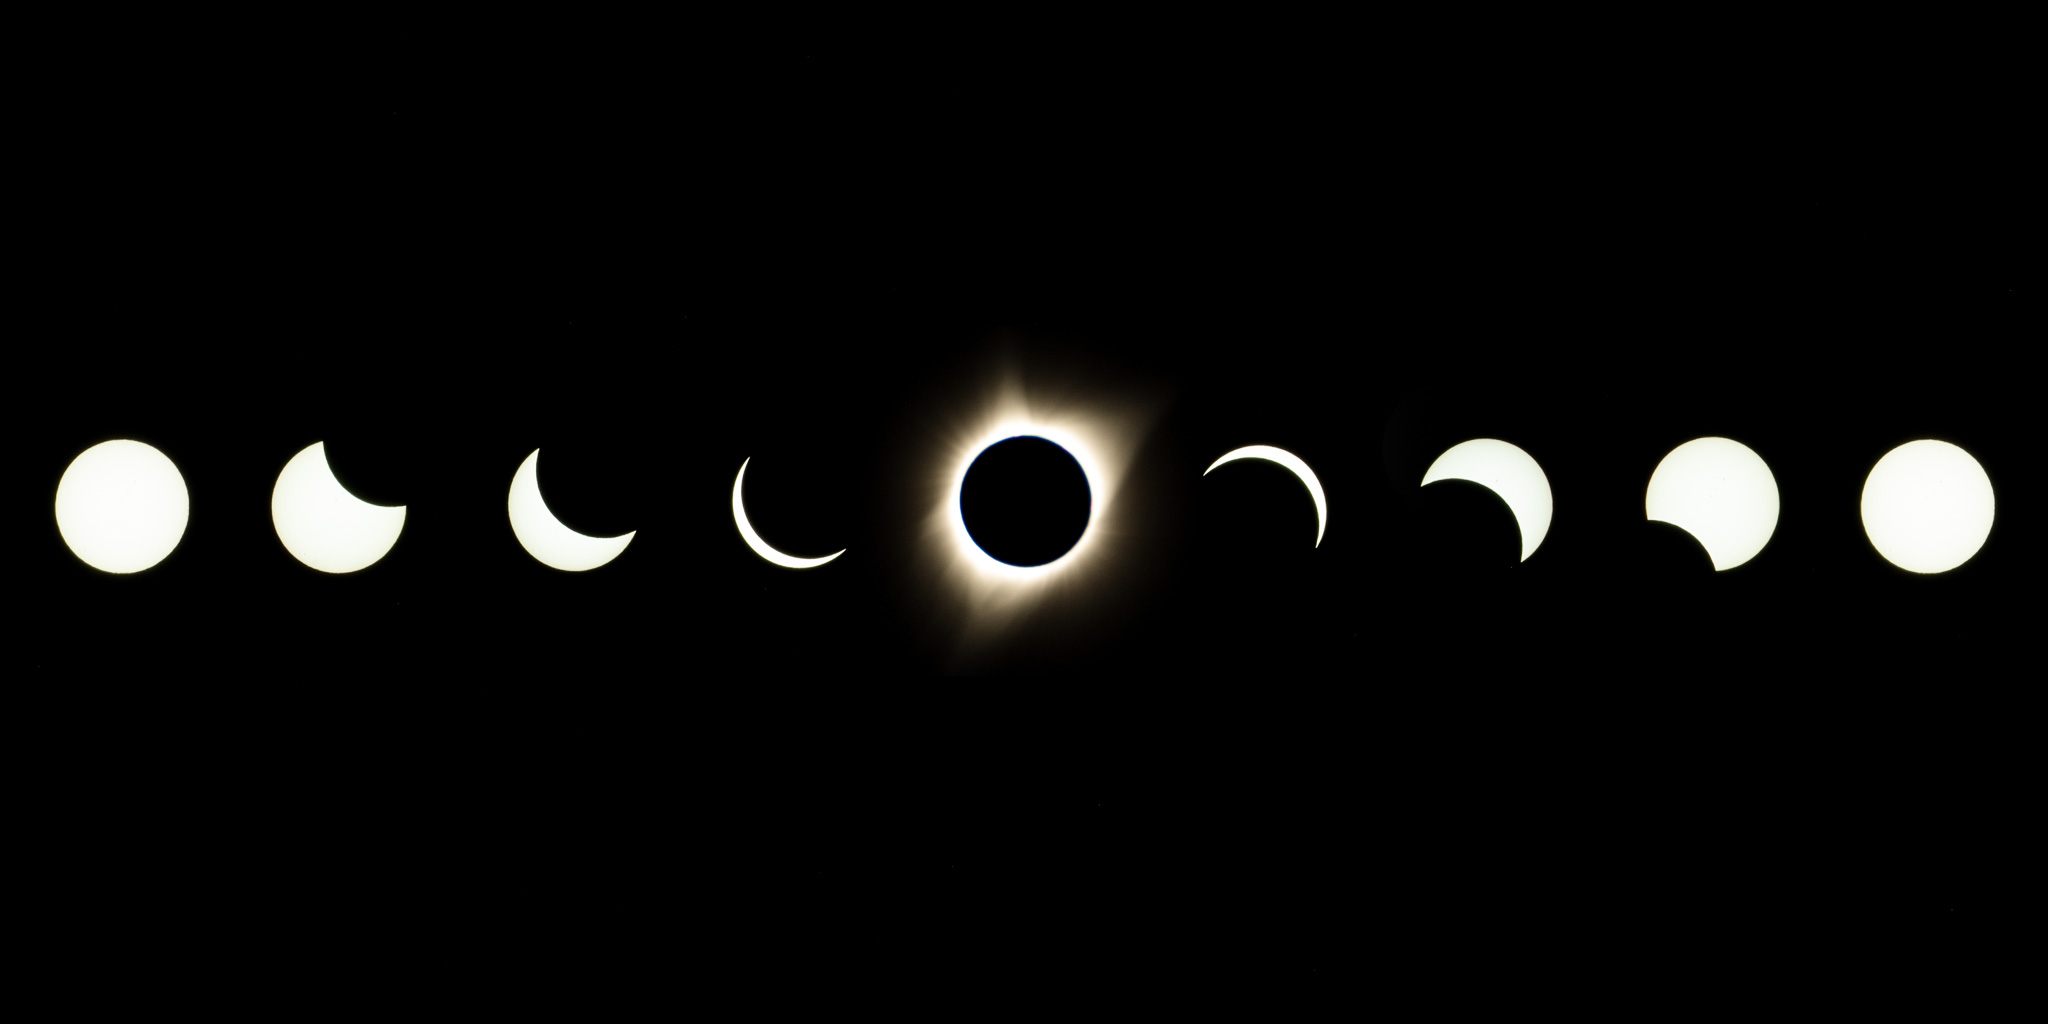  The eclipse itself was such a unique experience in the Zone of Totality, and so hard to describe in a way that really portrays it.&nbsp; The day literally turned to night, the temperature dropped significantly....crickets started chirping, birds wen